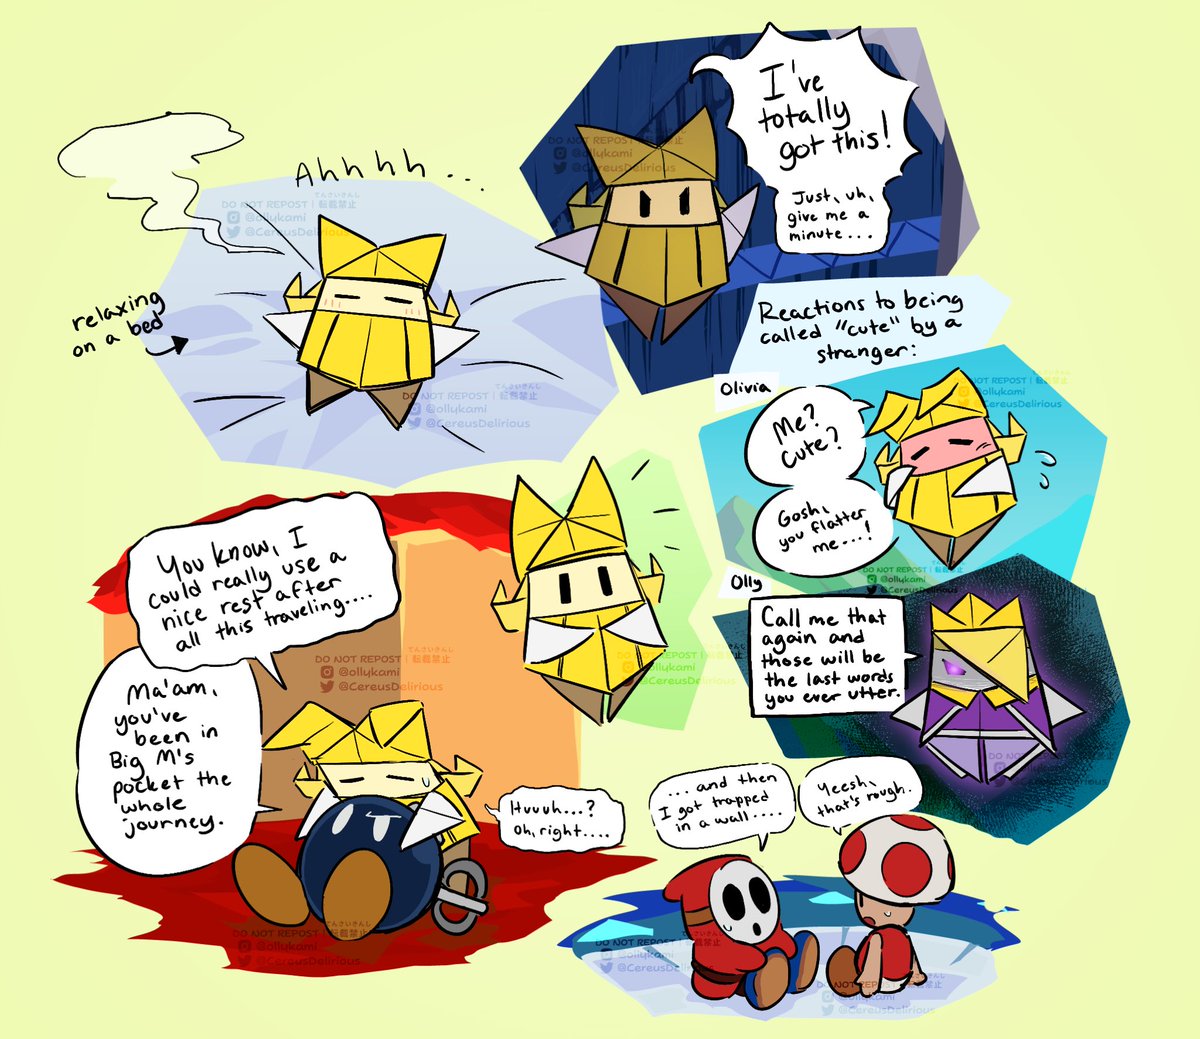 hahahaha. Hi. makes canon pmtok art for the first time in ages
I promise i still love them i draw pmtok every chance i get but i hardly draw in general
#pmtok #papermariotheorigamiking #papermario #supermariorpg #origamiking #オリキン #ペーパーマリオ #ペーパーマリオオリガミキング